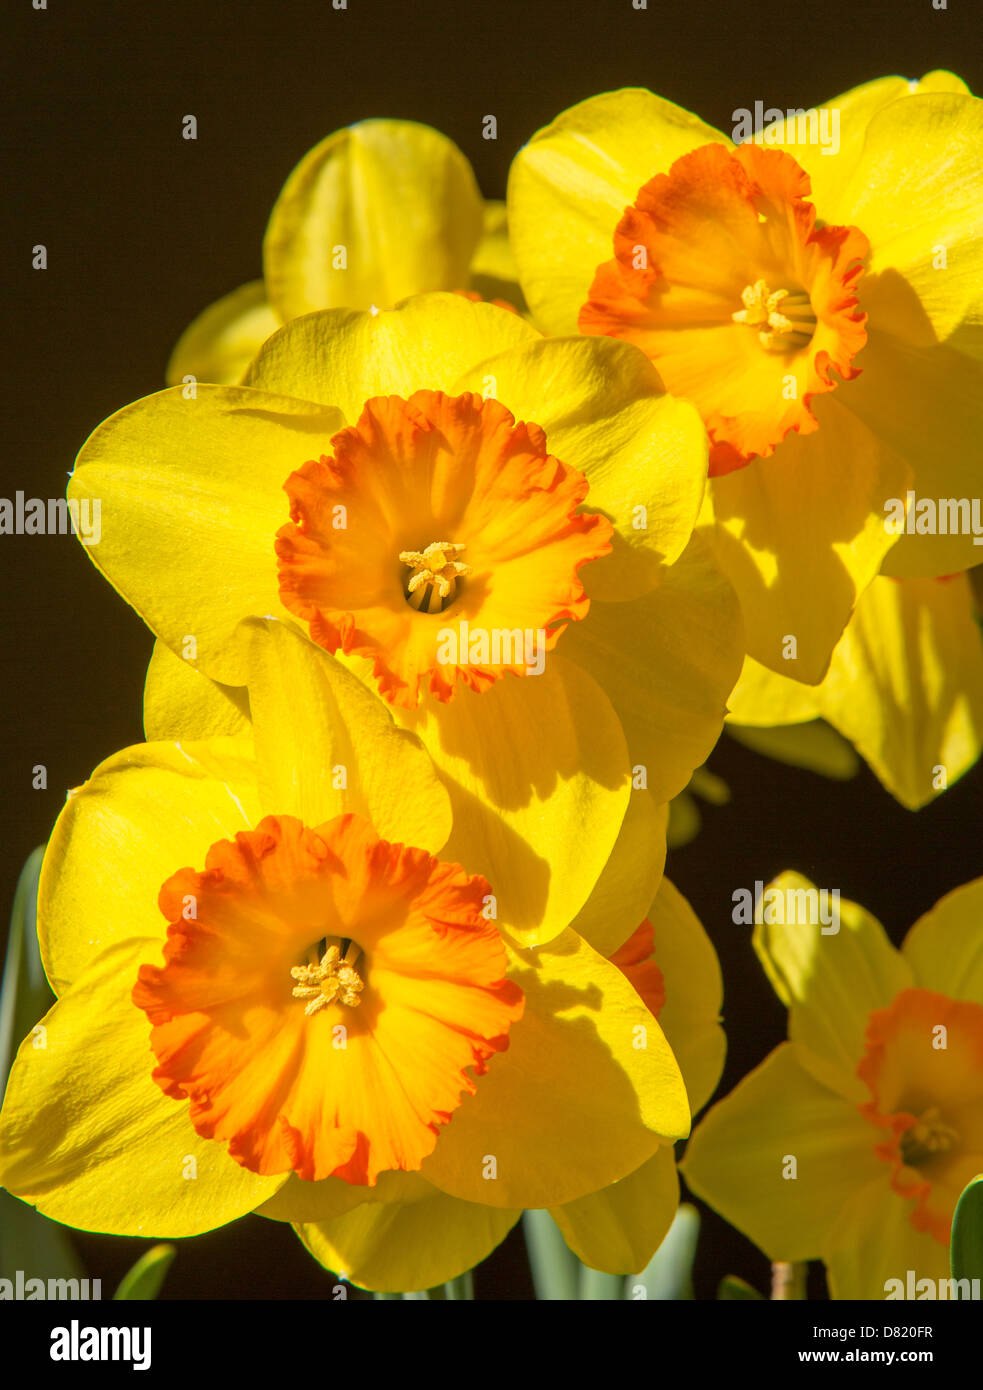 VIRGINIA, USA - Daffodils in bloom, blossoming flowers. Stock Photo